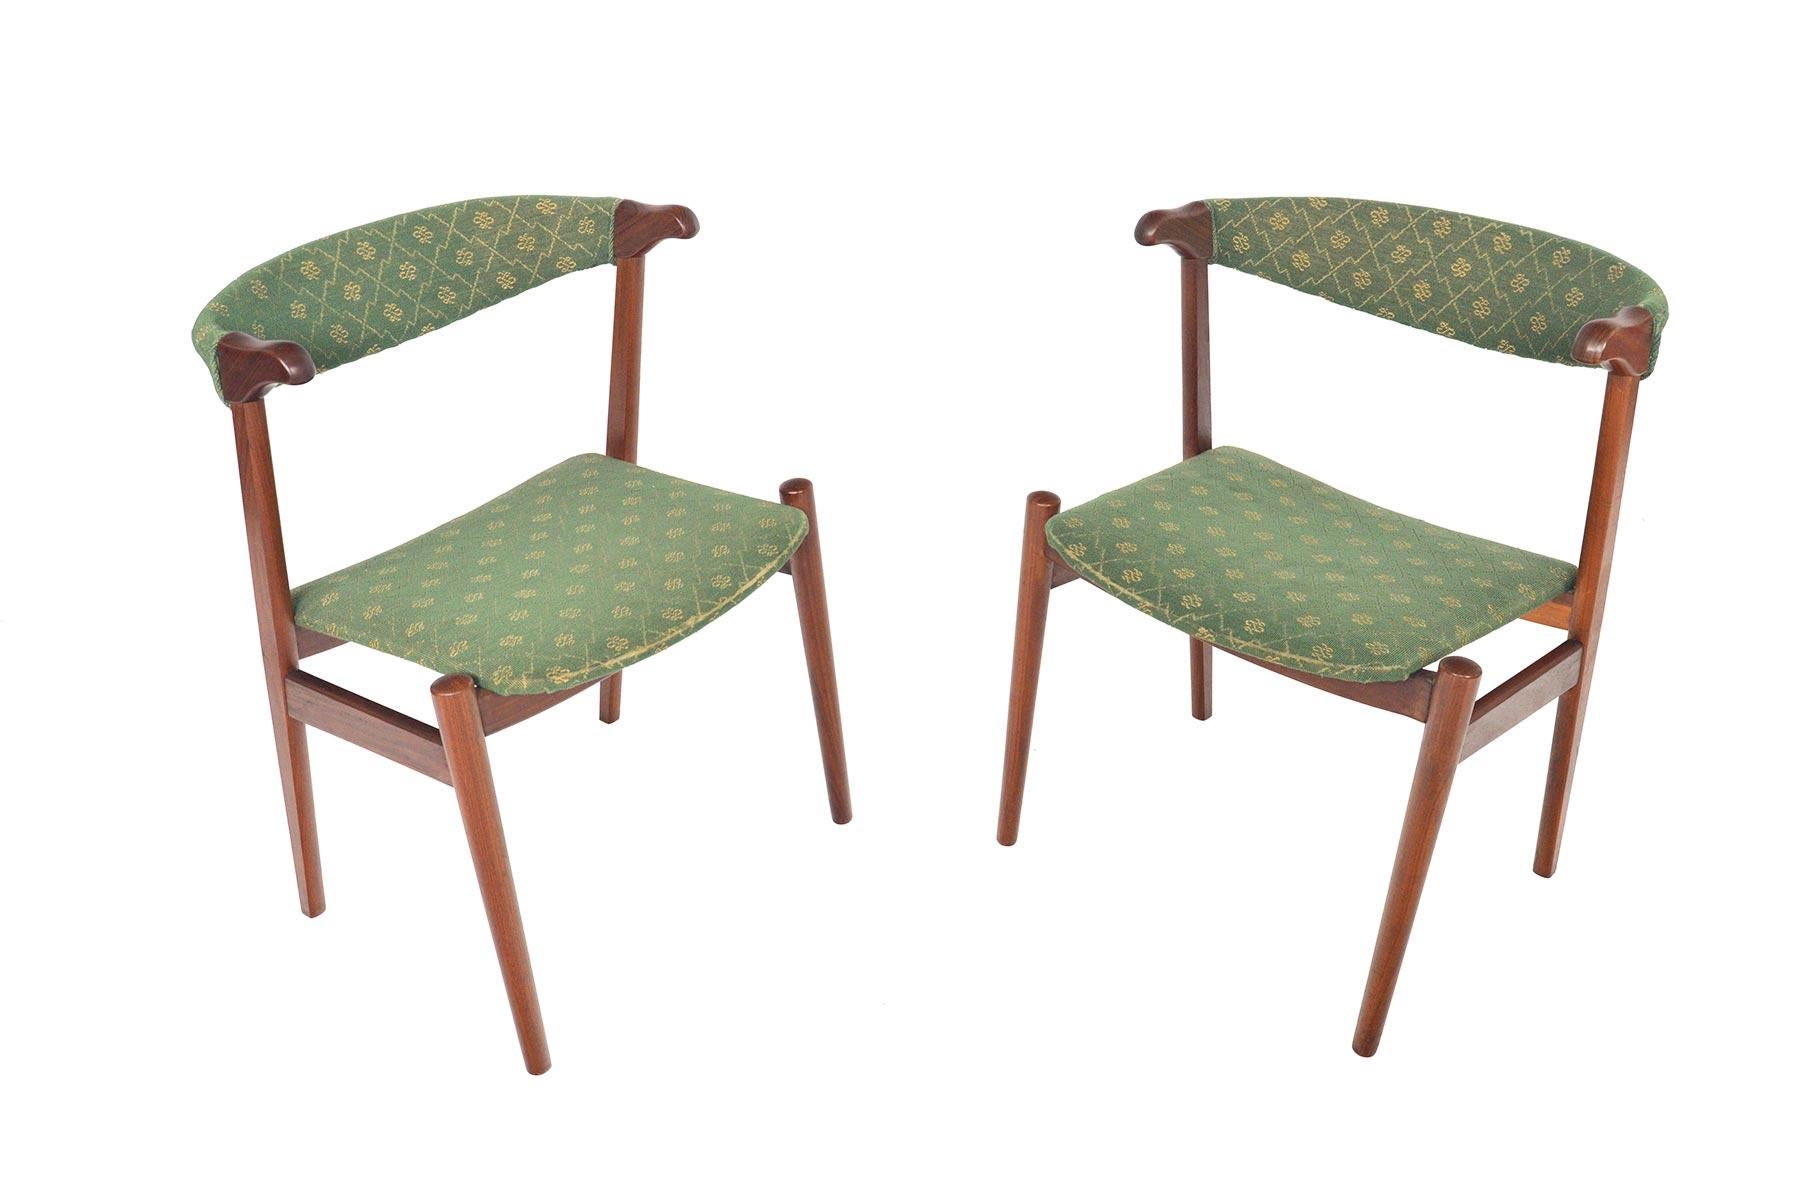 This Classic set of Danish modern armchairs offer a traditional silhouette crafted from teak afrormosia. Perfect for use as occasional chairs, paired with a dining set, or a desk, these chairs feature an upholstered backrest and small arms. Chairs